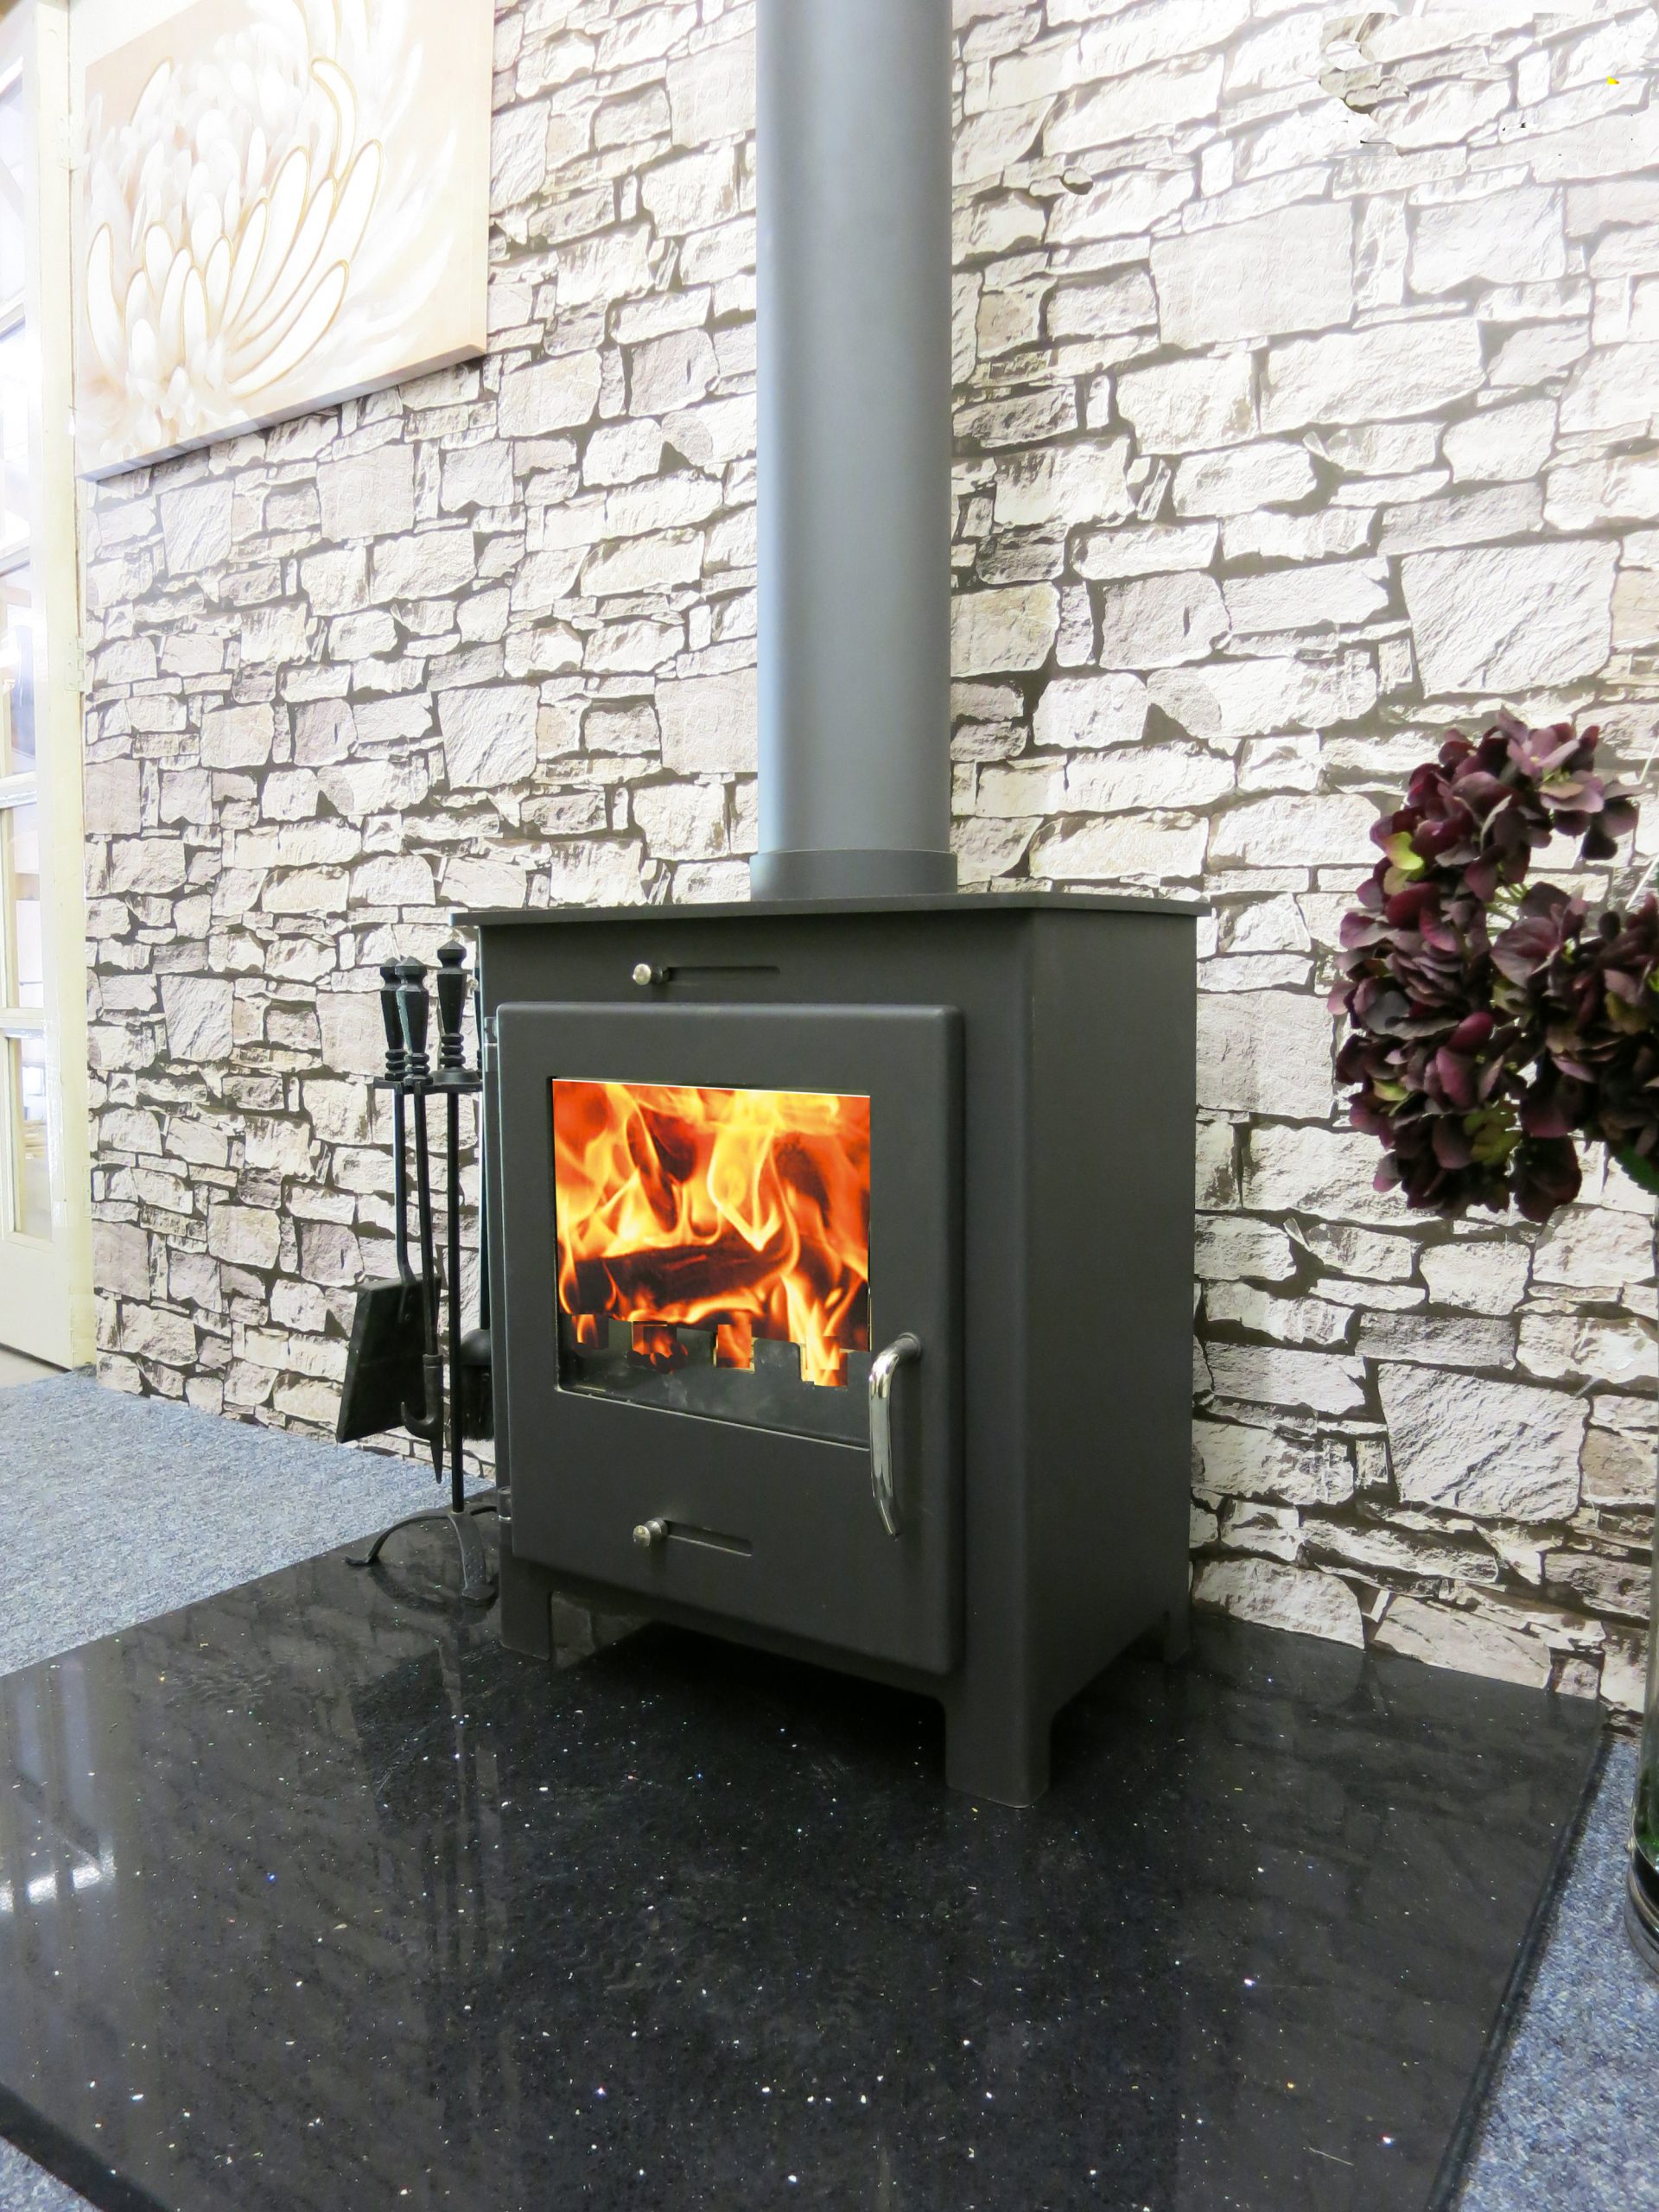 New Coal Burning Stove with Simple Decor